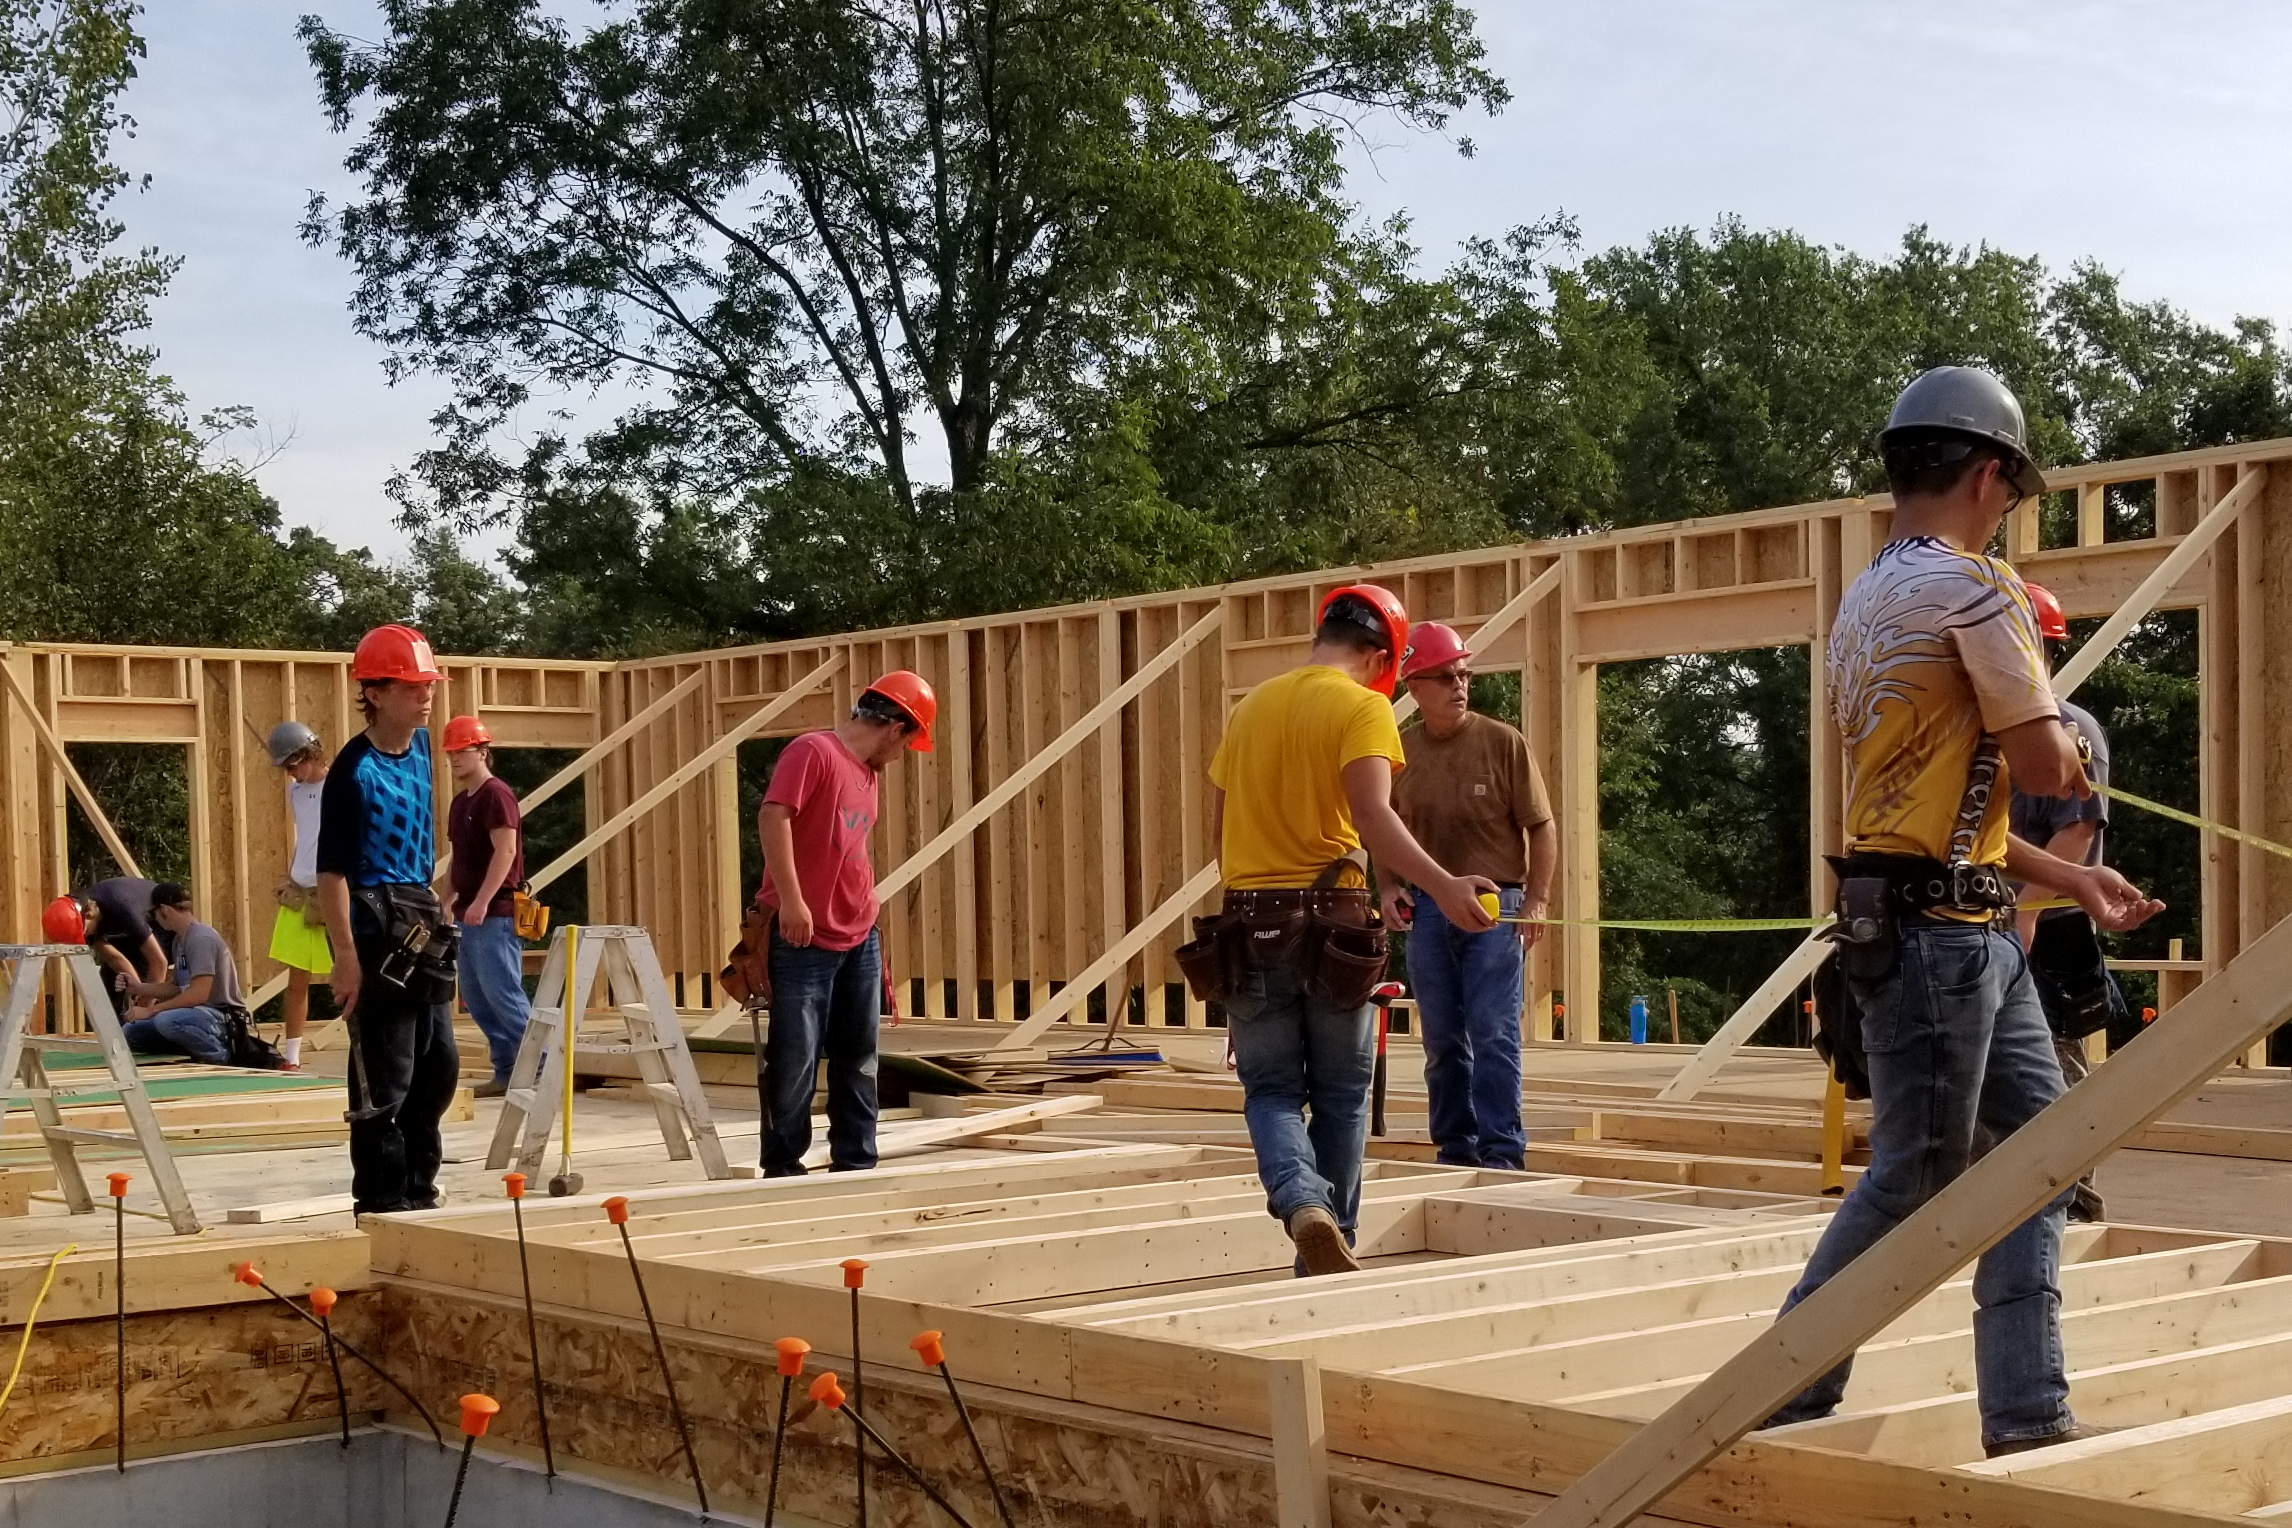 Building Trades students work on building the walls and floor of a new home